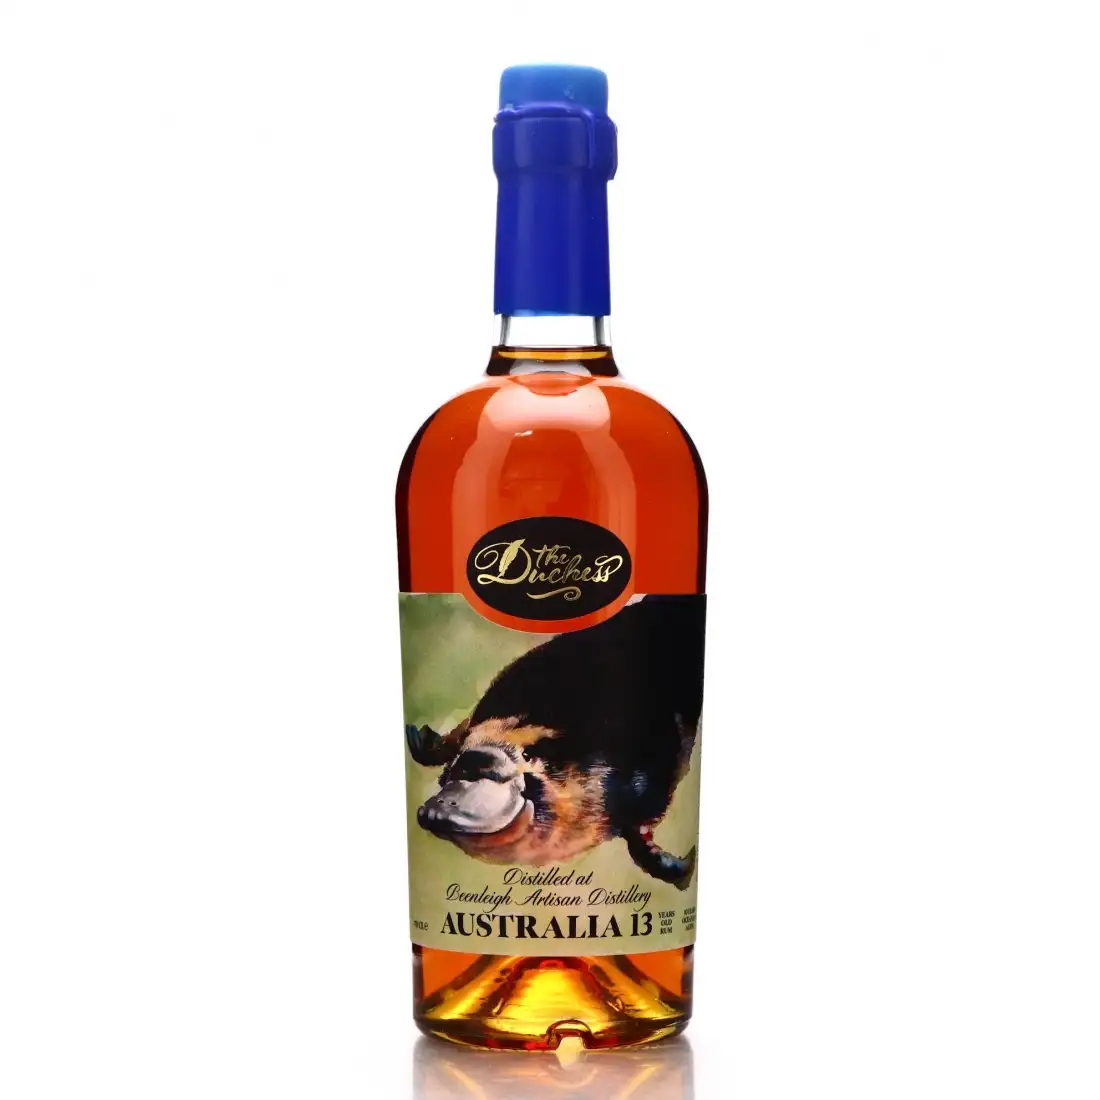 Image of the front of the bottle of the rum Australia 13